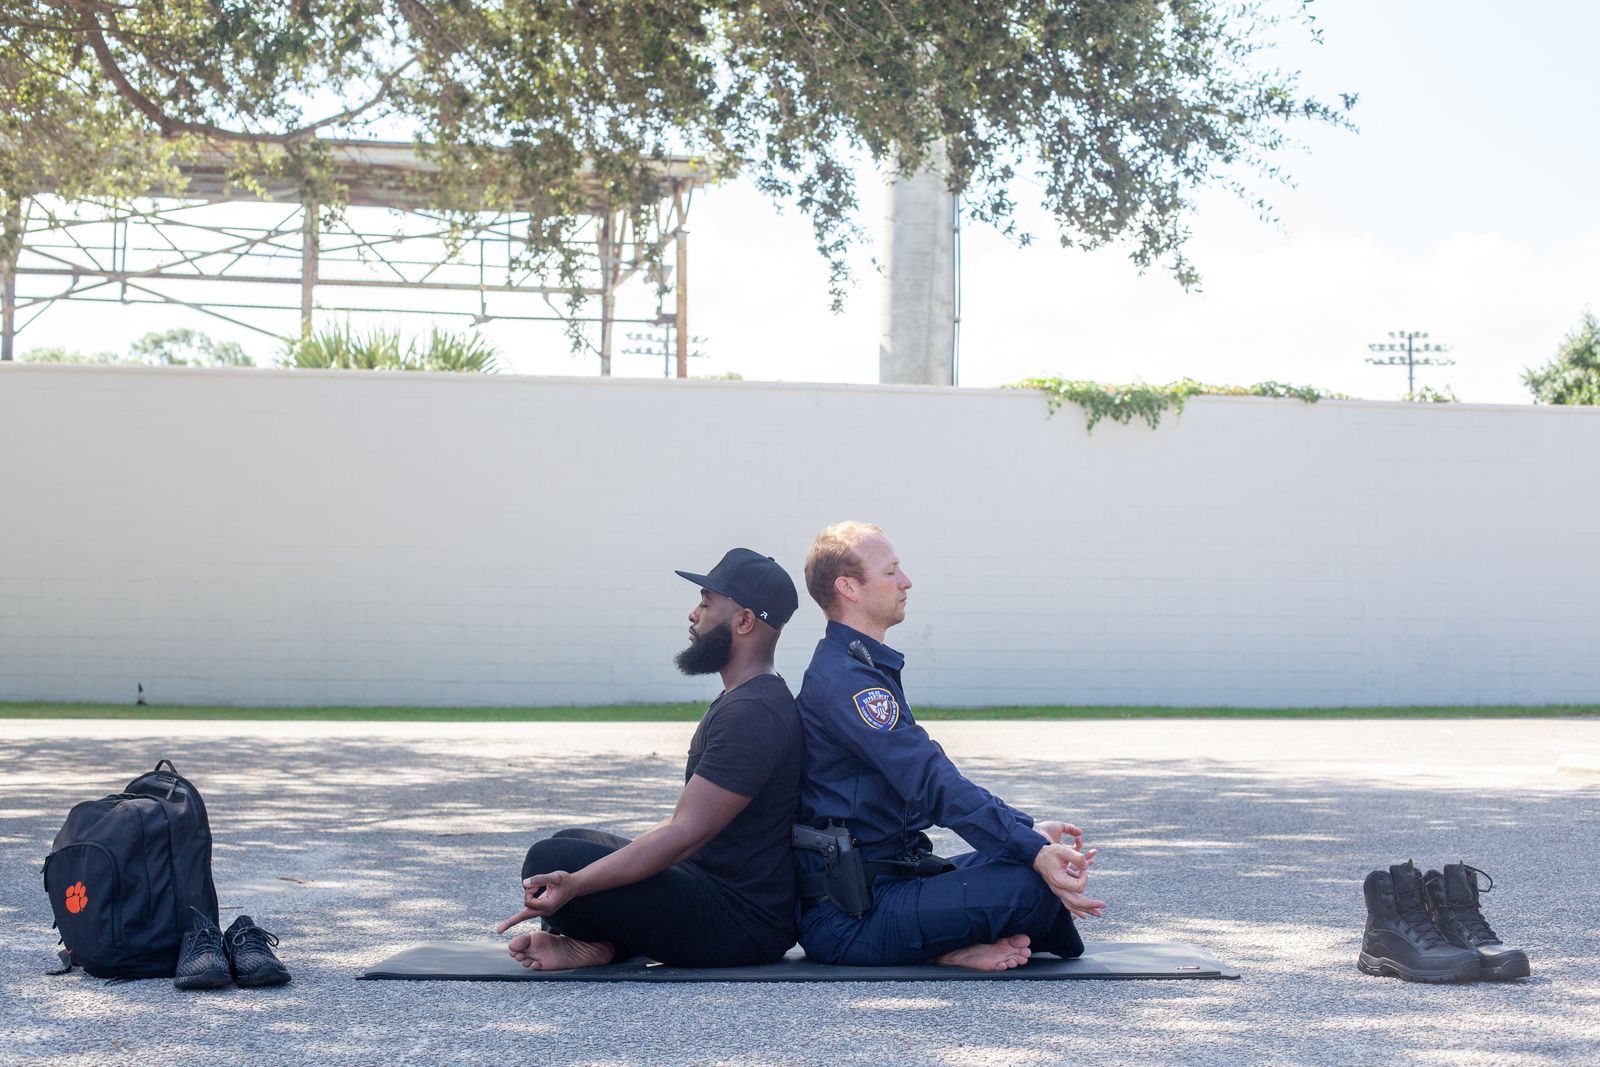 © Medina Dugger - Image from the Couples Yoga photography project